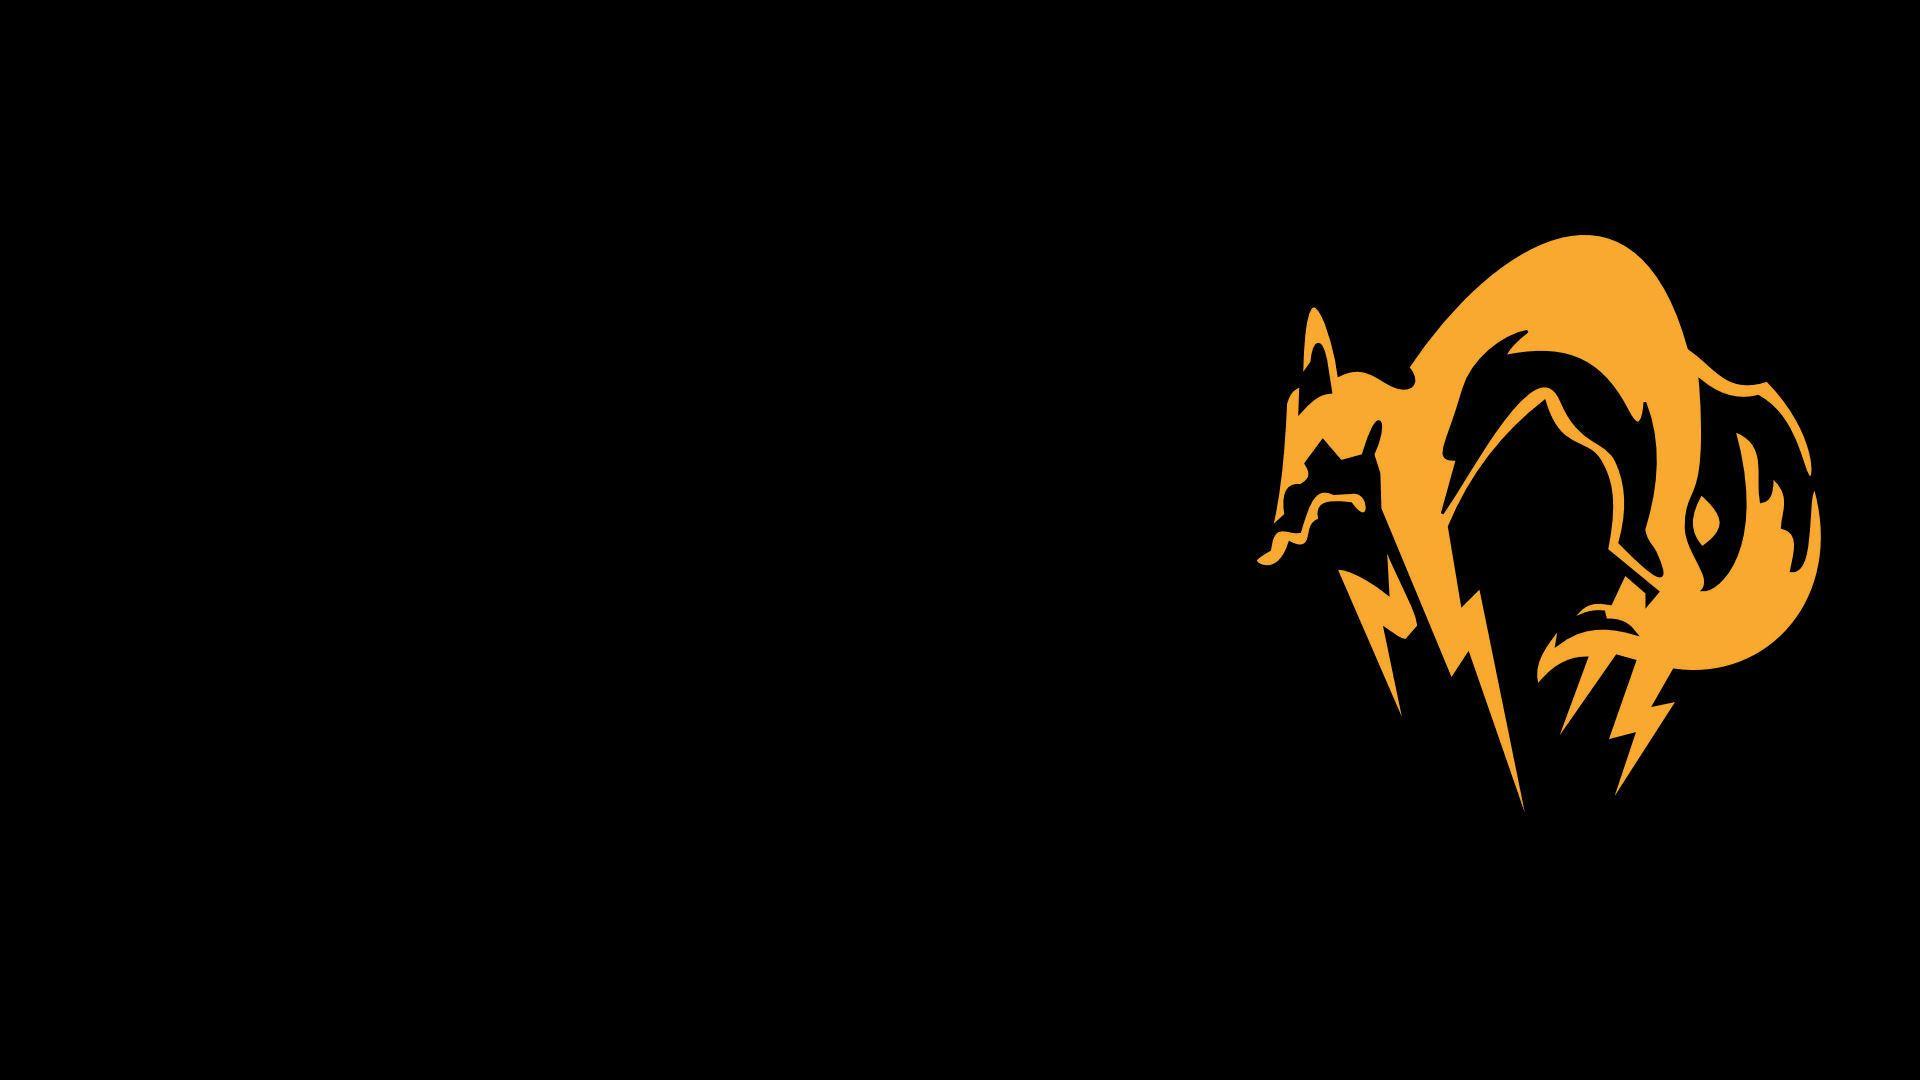 Metal gear solid background